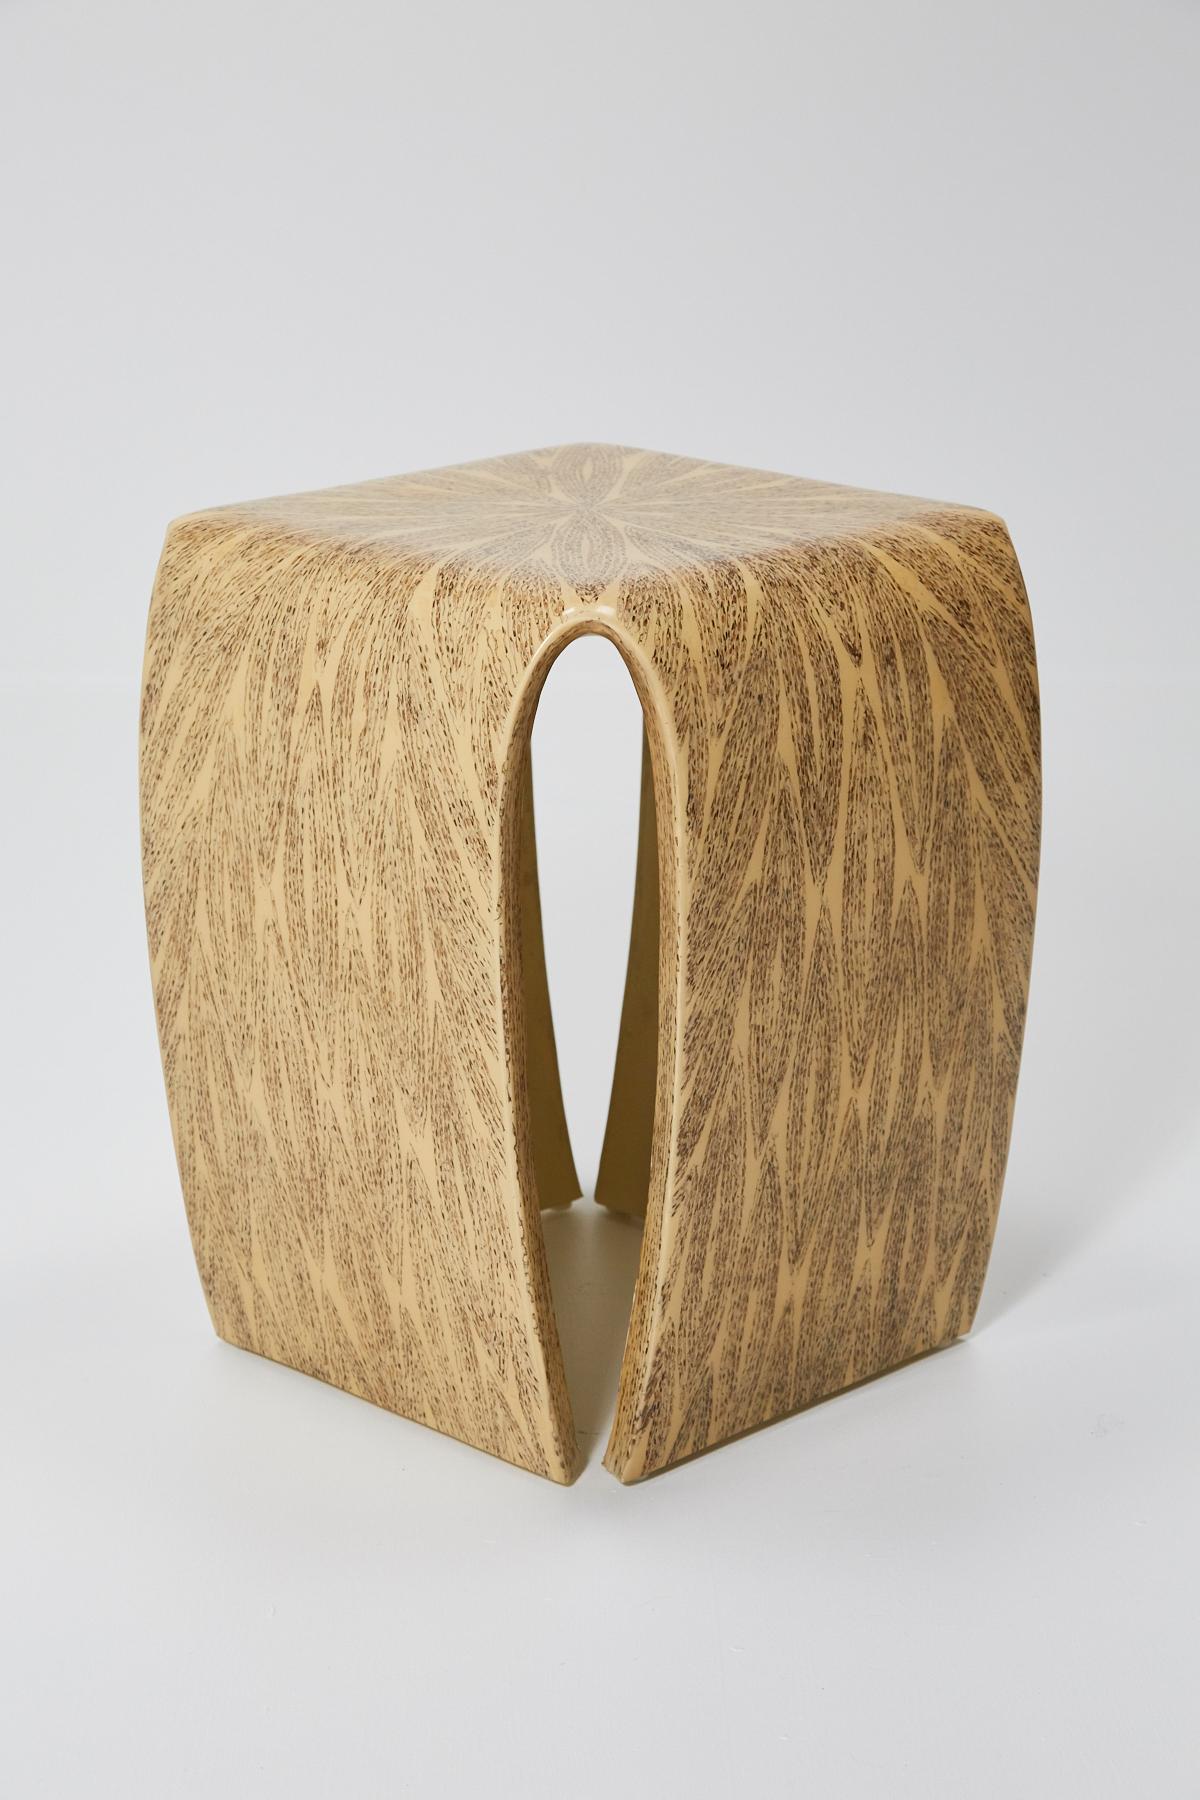 Lacquered side table in a natural tan hue, inlaid with wild pearl vine in the shapes of leaves which form an overall pattern. Fiberglass body with slit corners.

All furnishings are made from 100% natural materials, carefully hand cut and crafted